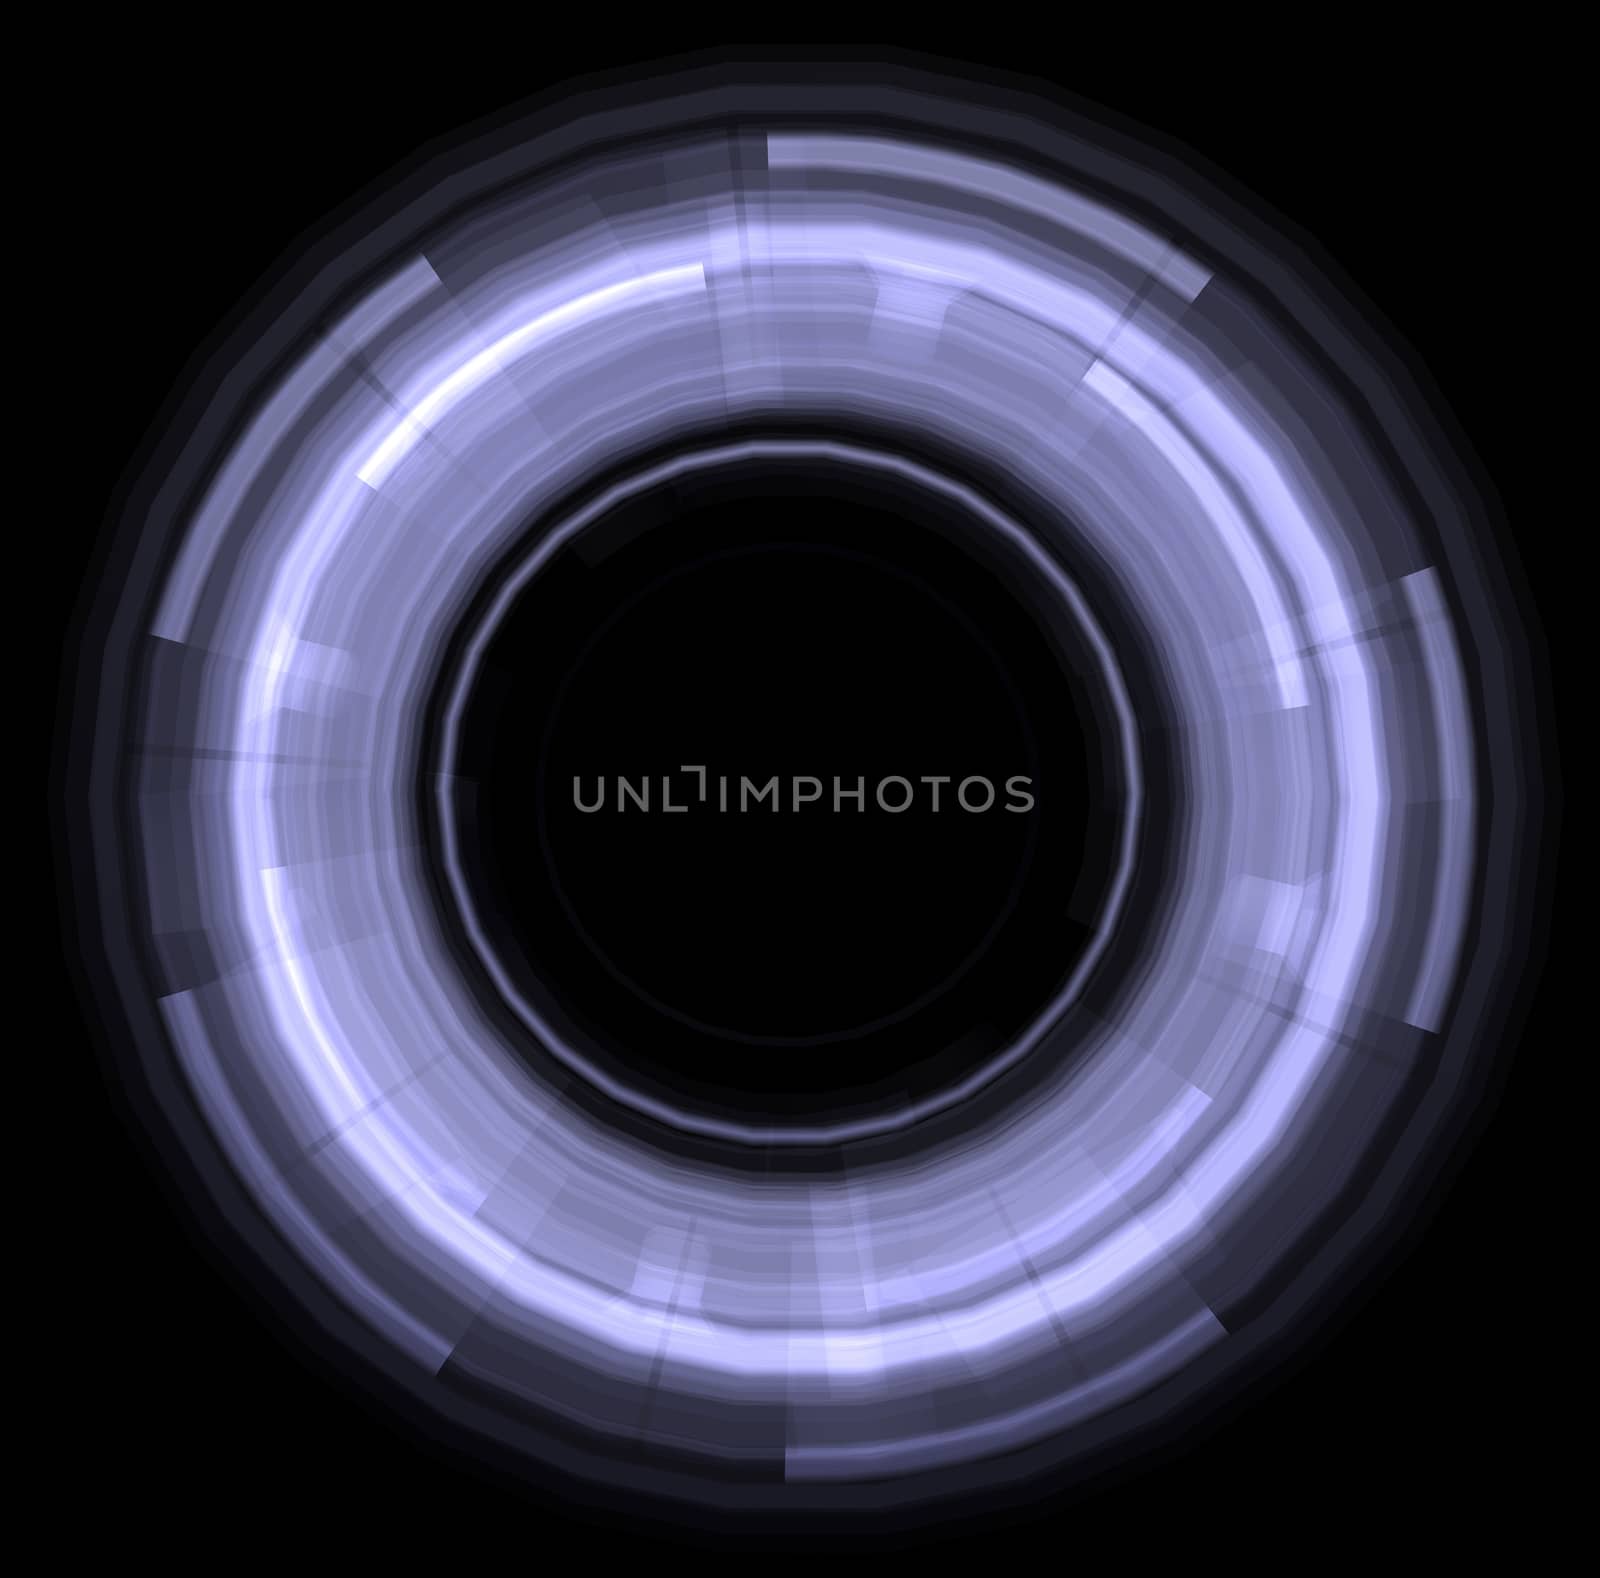 Abstract glowing circle. Design element. Isolated on a black background